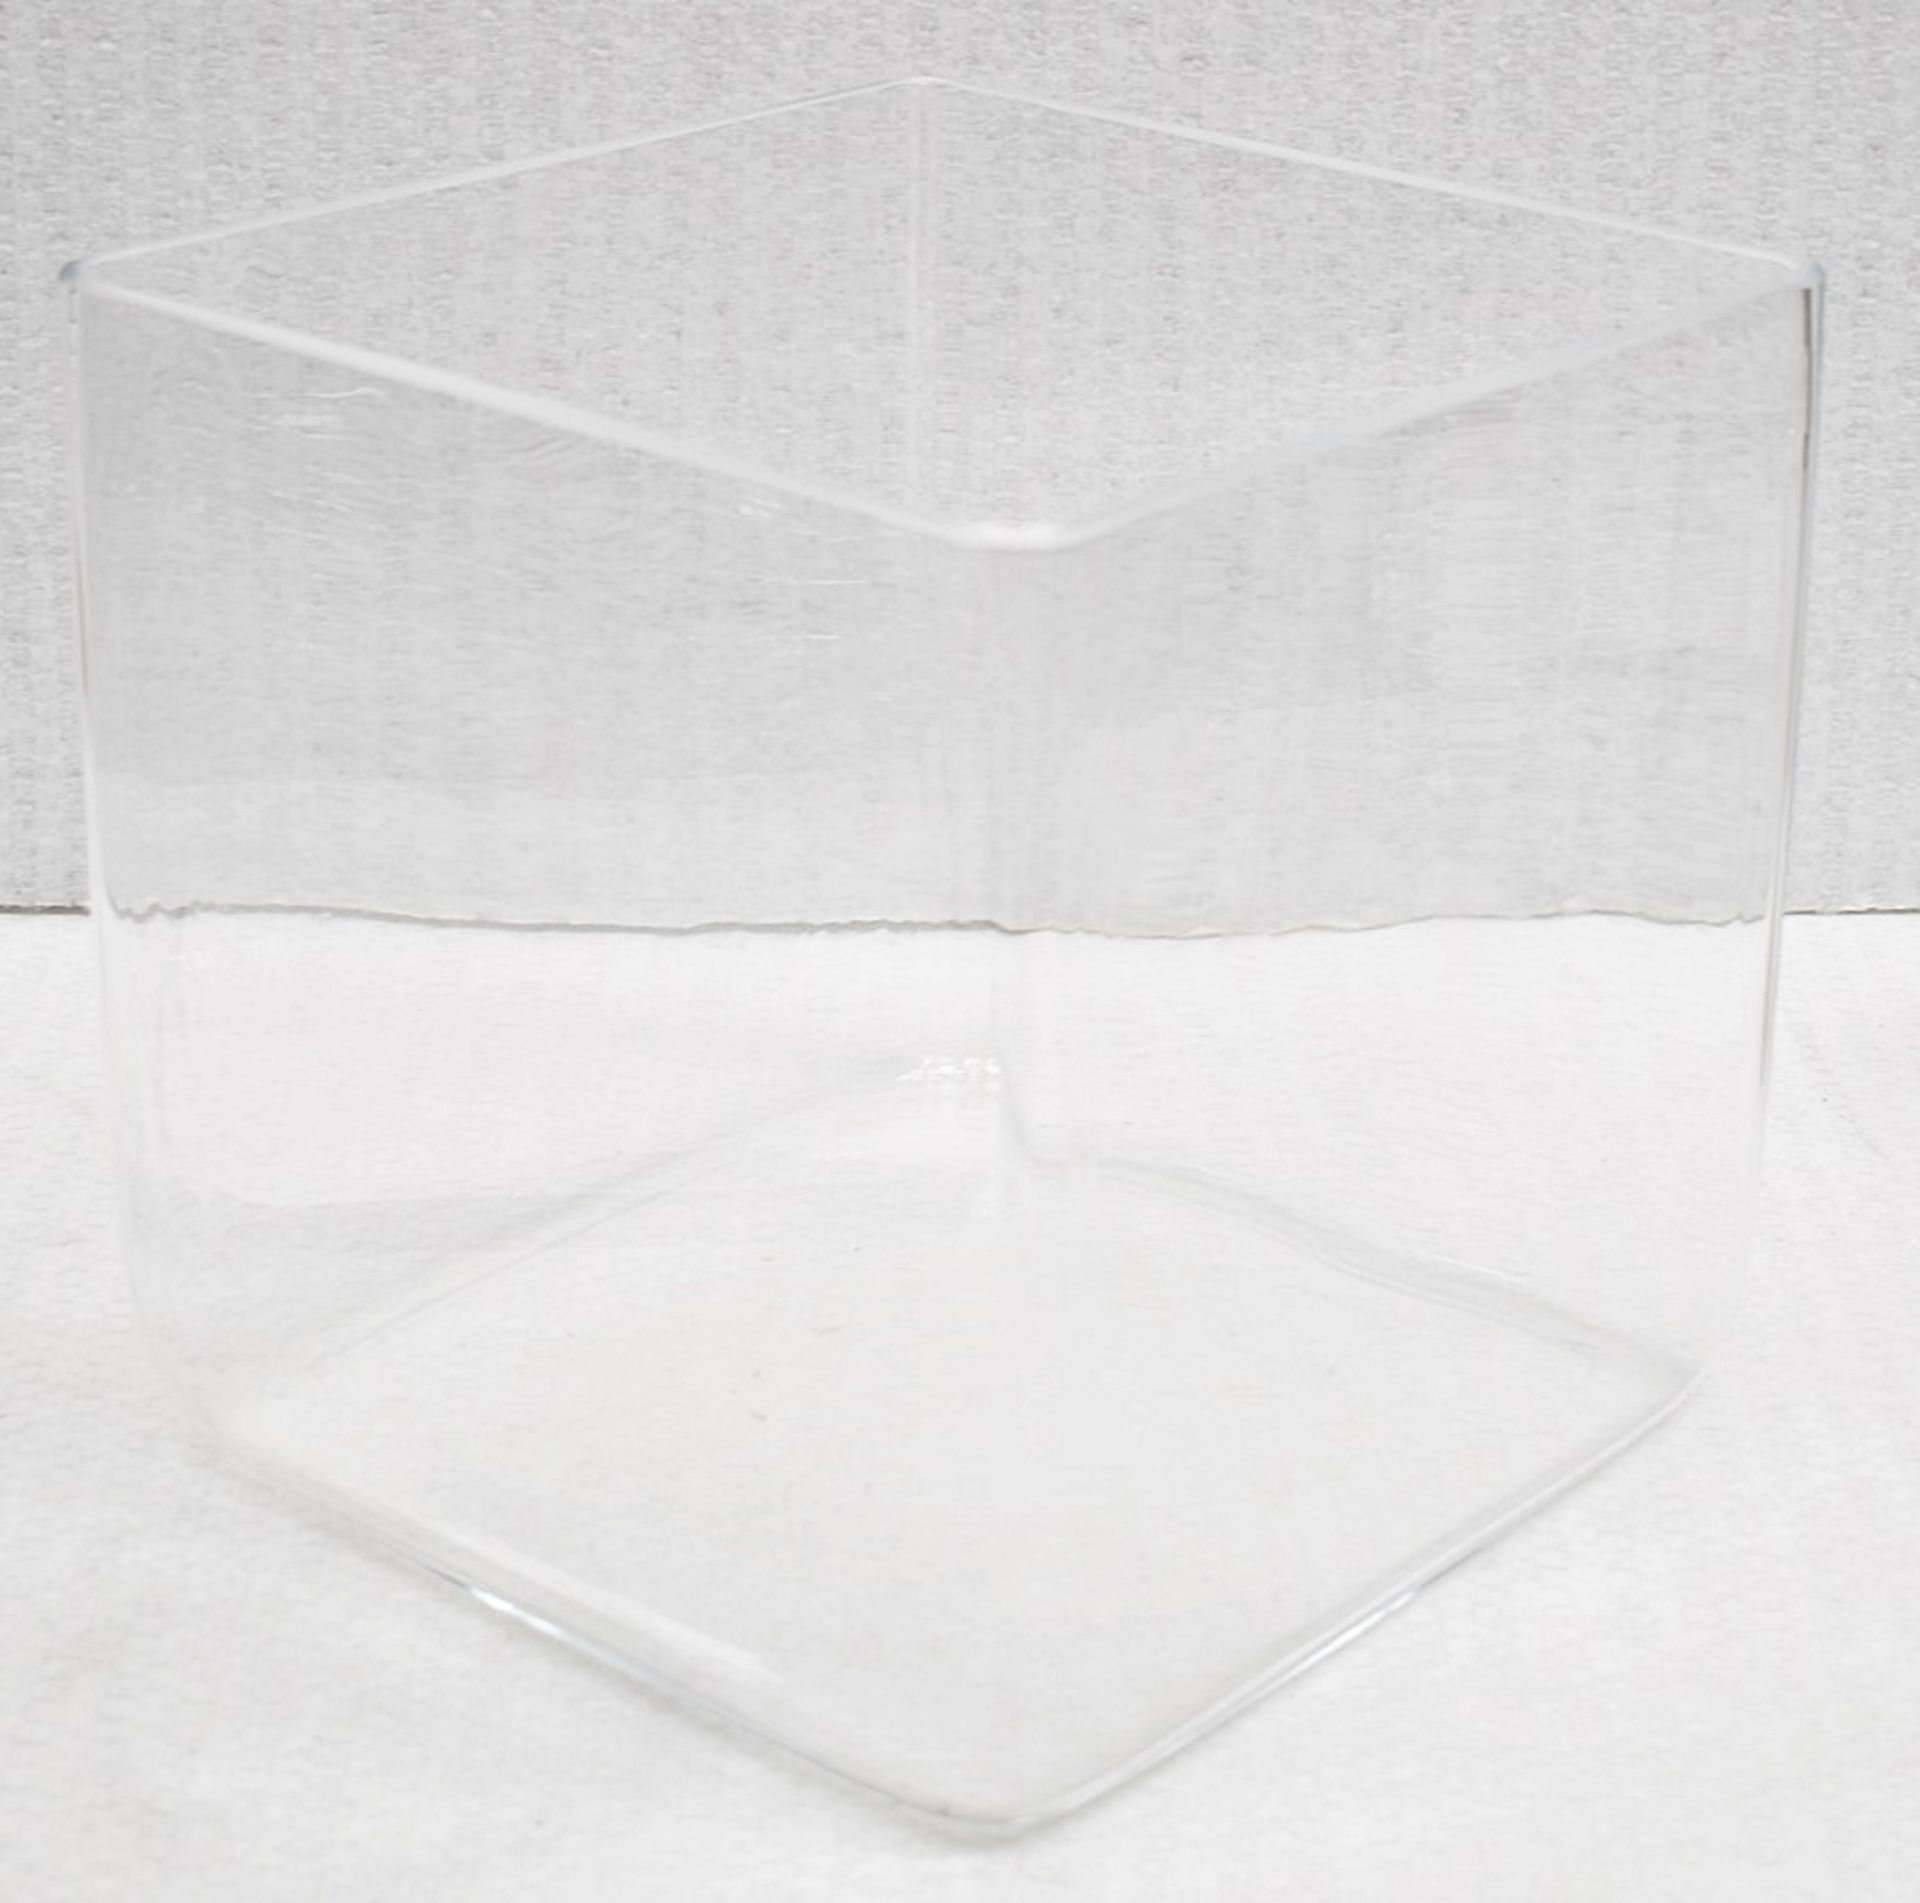 1 x Large Glass Cube Vase - Ref: CNT774/WH2/C24 - CL845 - NO VAT ON THE HAMMER - Location: - Image 2 of 2